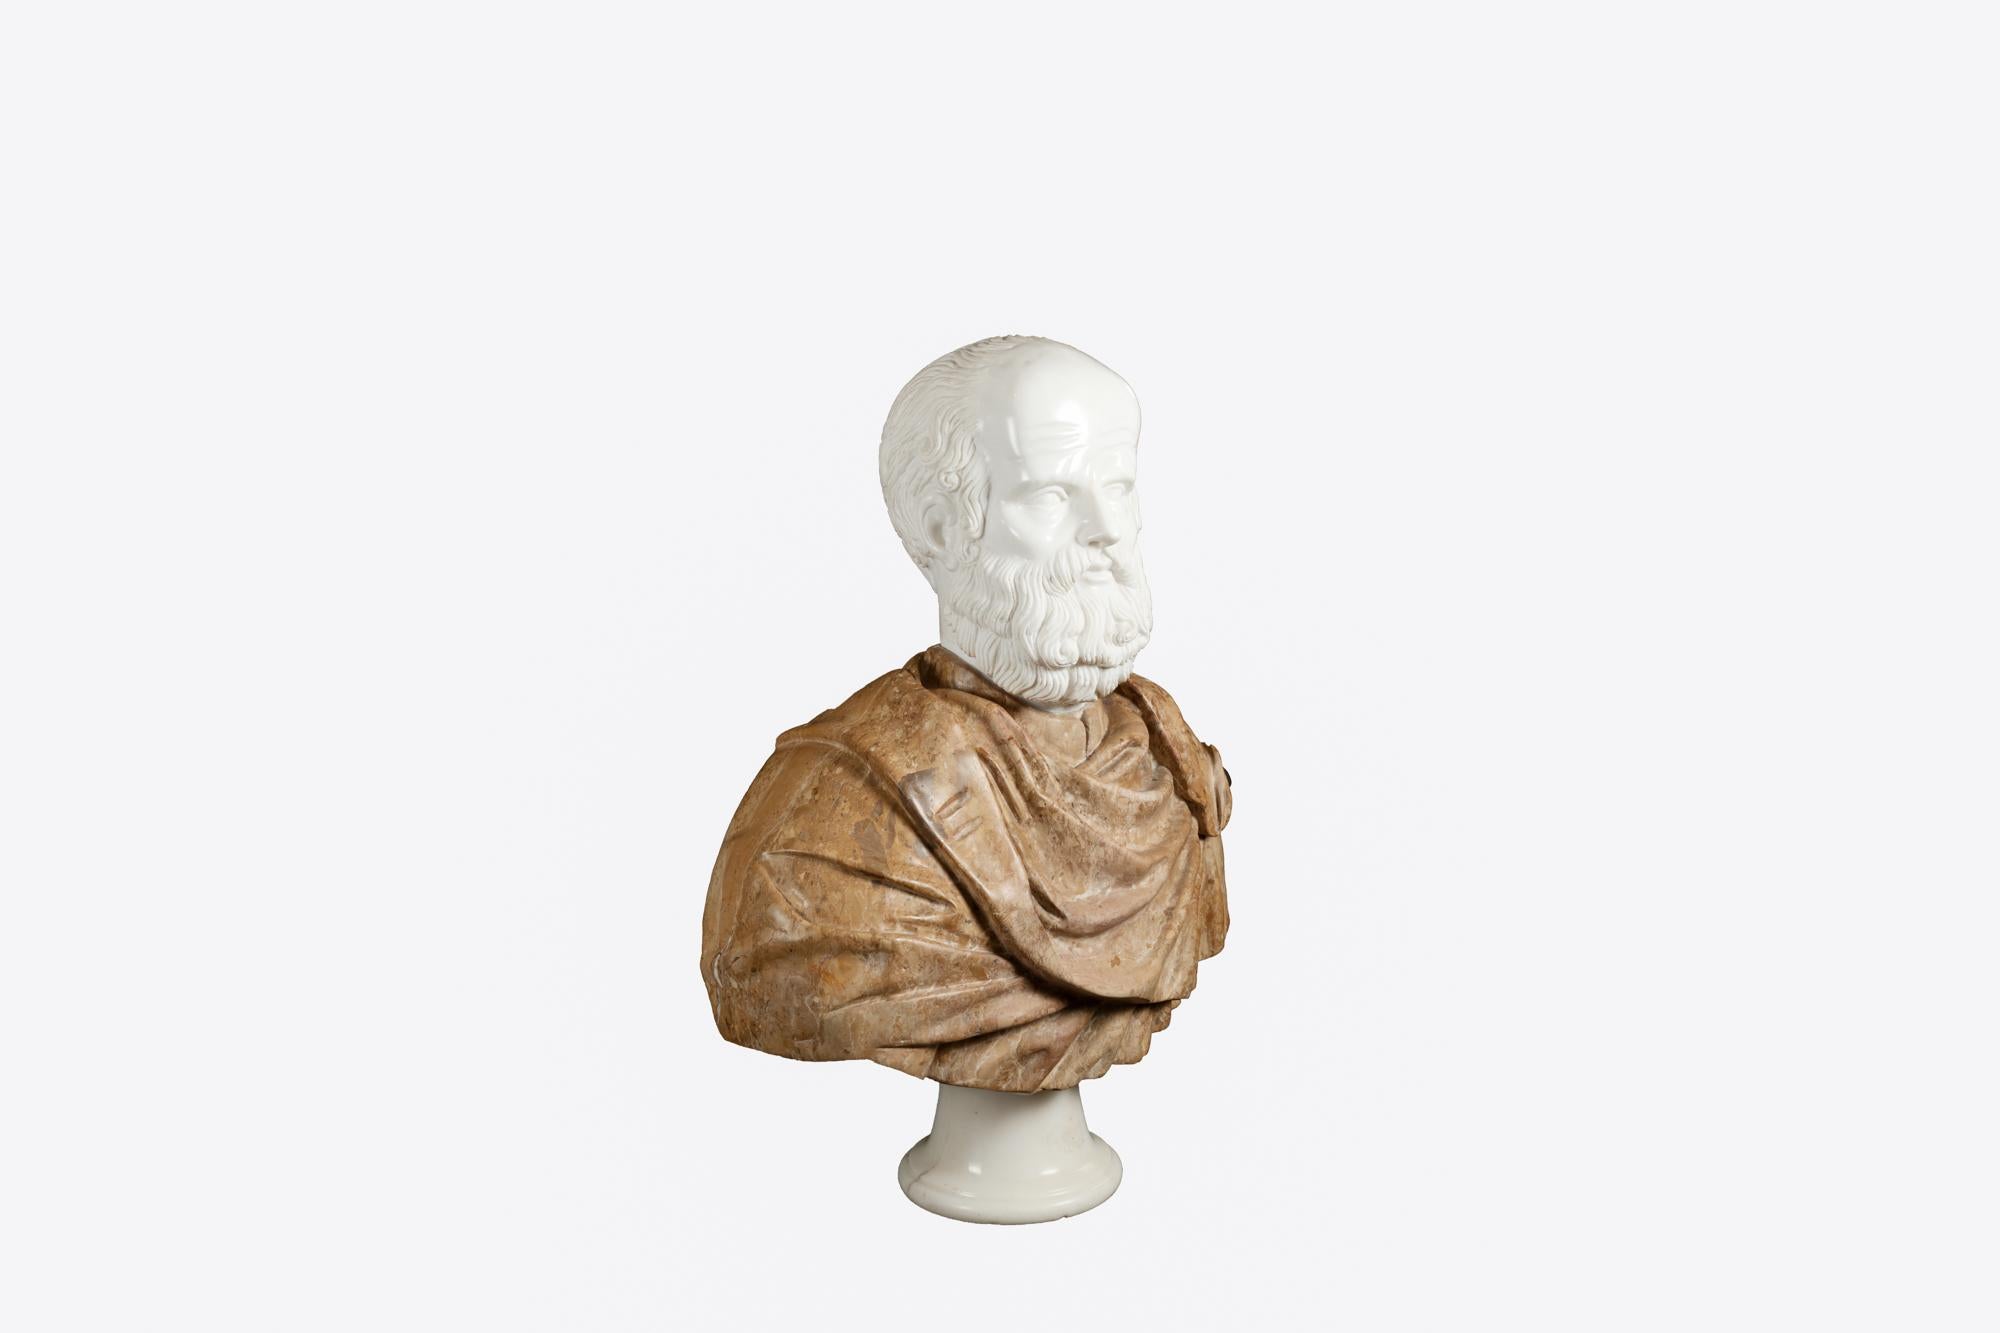 19th Century Italian Marble bust of the Classical Greek philosopher Socrates. His draped robe is hand-carved in red Scagliola with the face modelled in contrasting white Carrara marble. The piece sits on a cylindrical plinth base also of Carrara